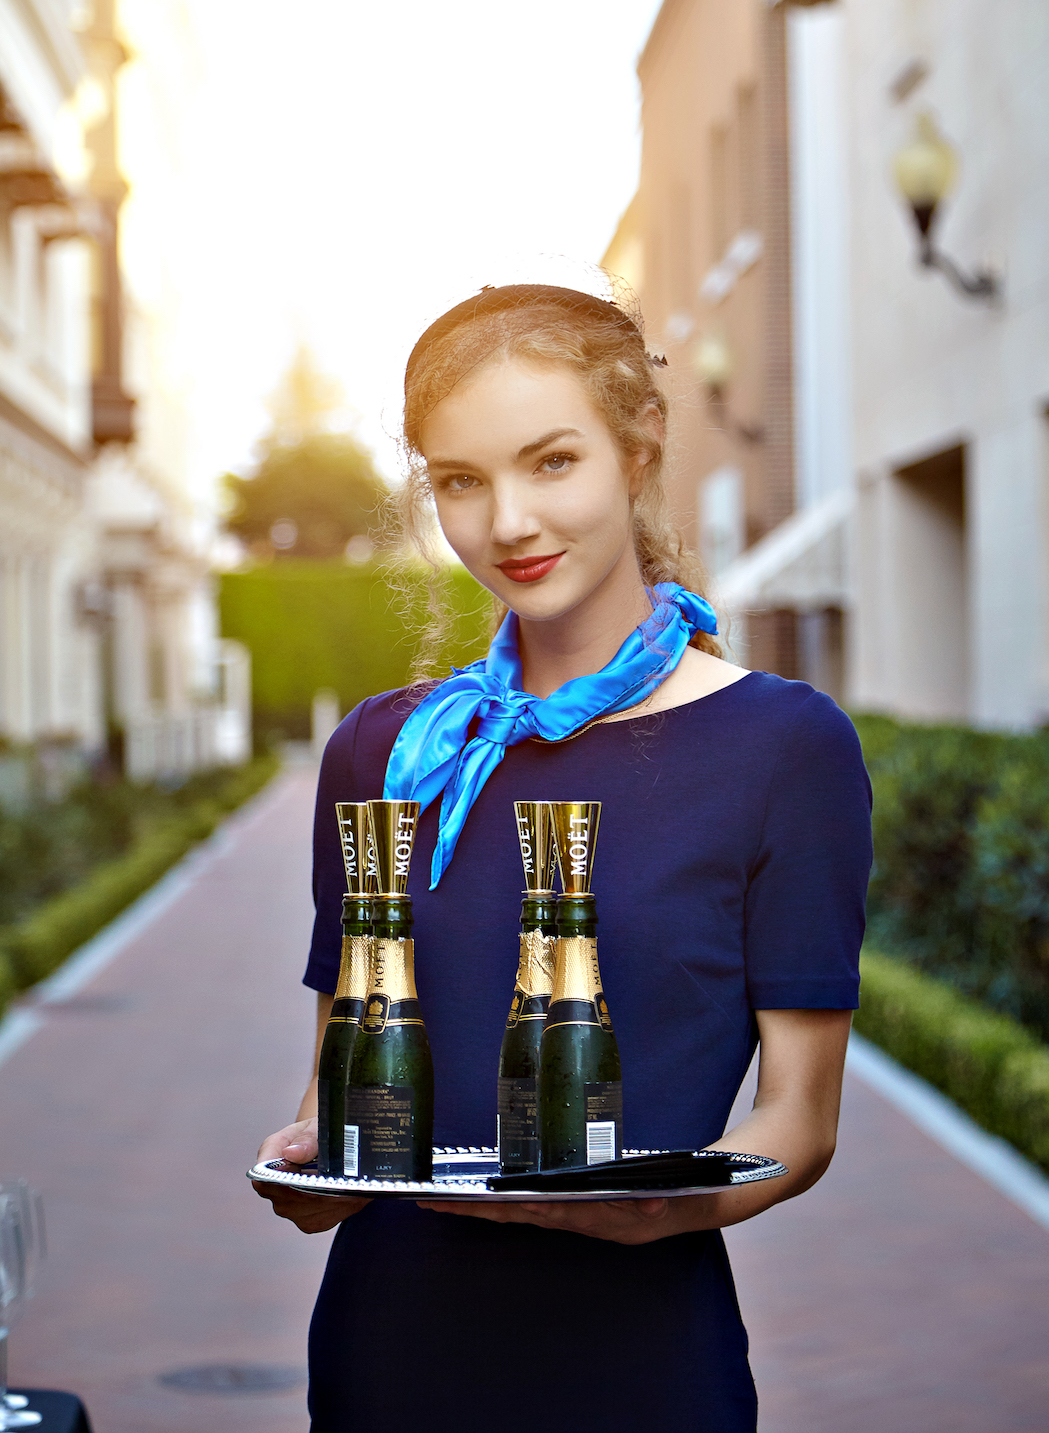 a person holding a tray of bottles